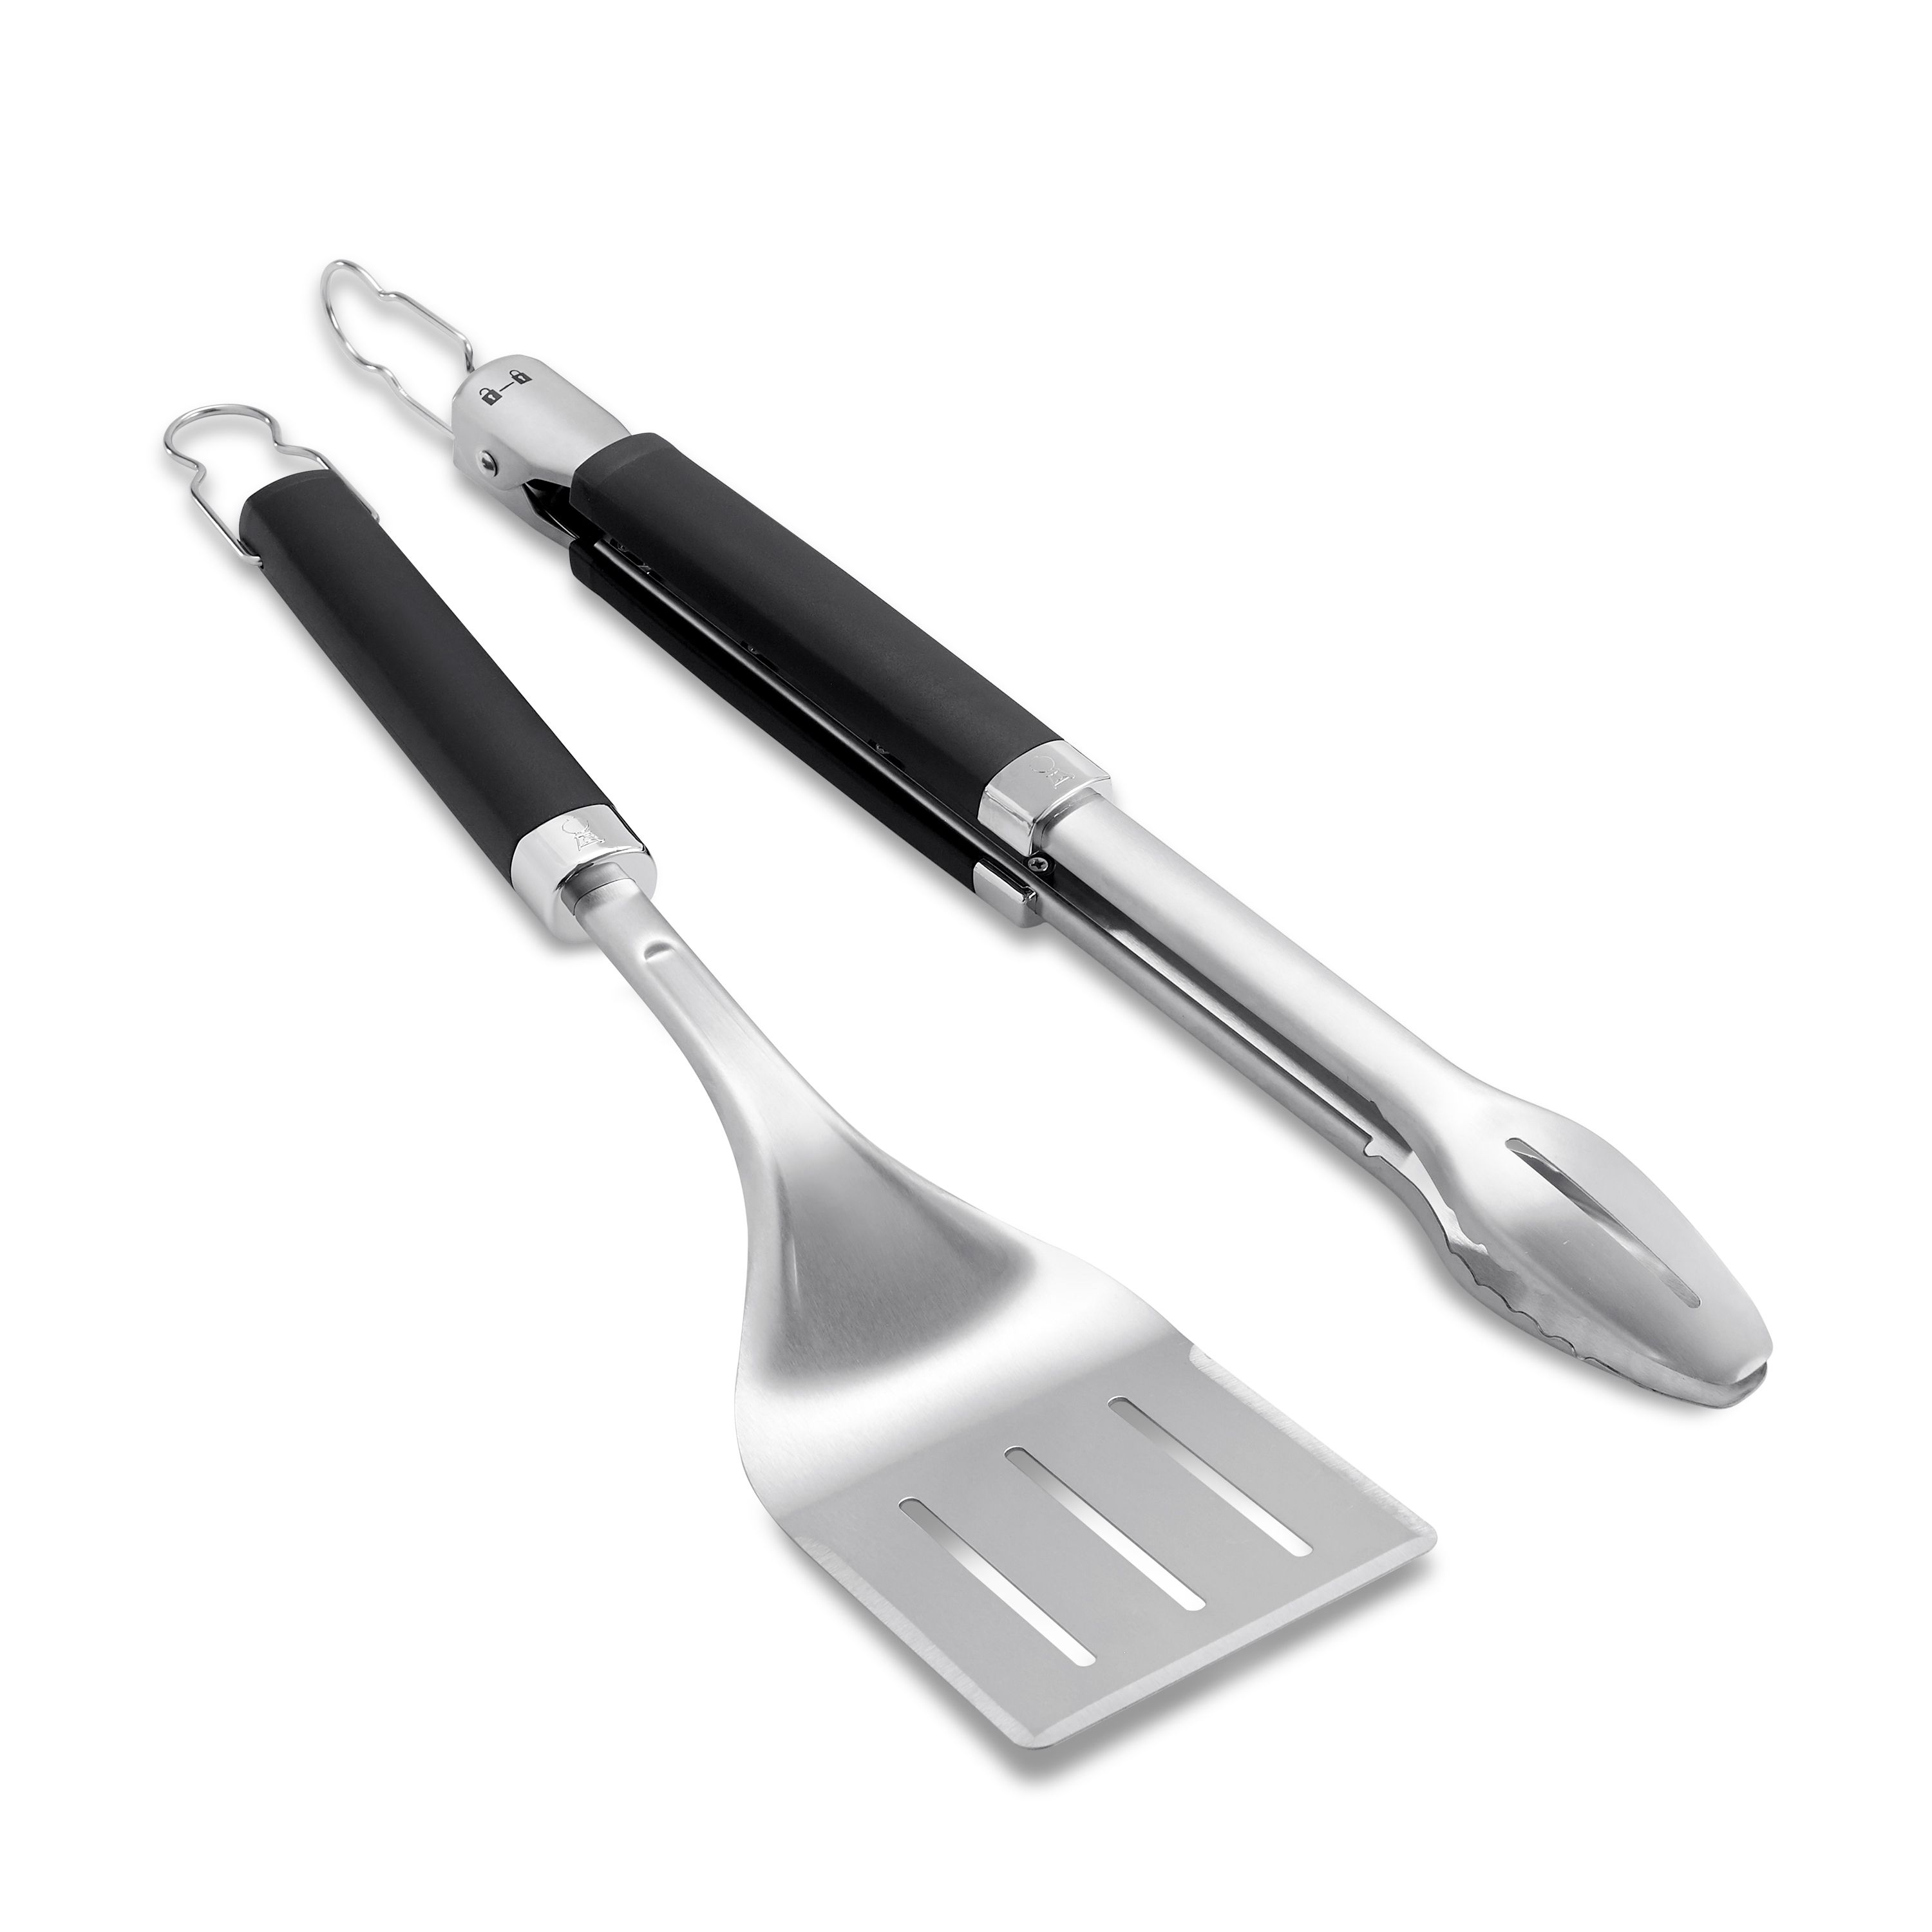 Weber Precision Silver, Black Stainless steel 2 piece Barbecue tool set